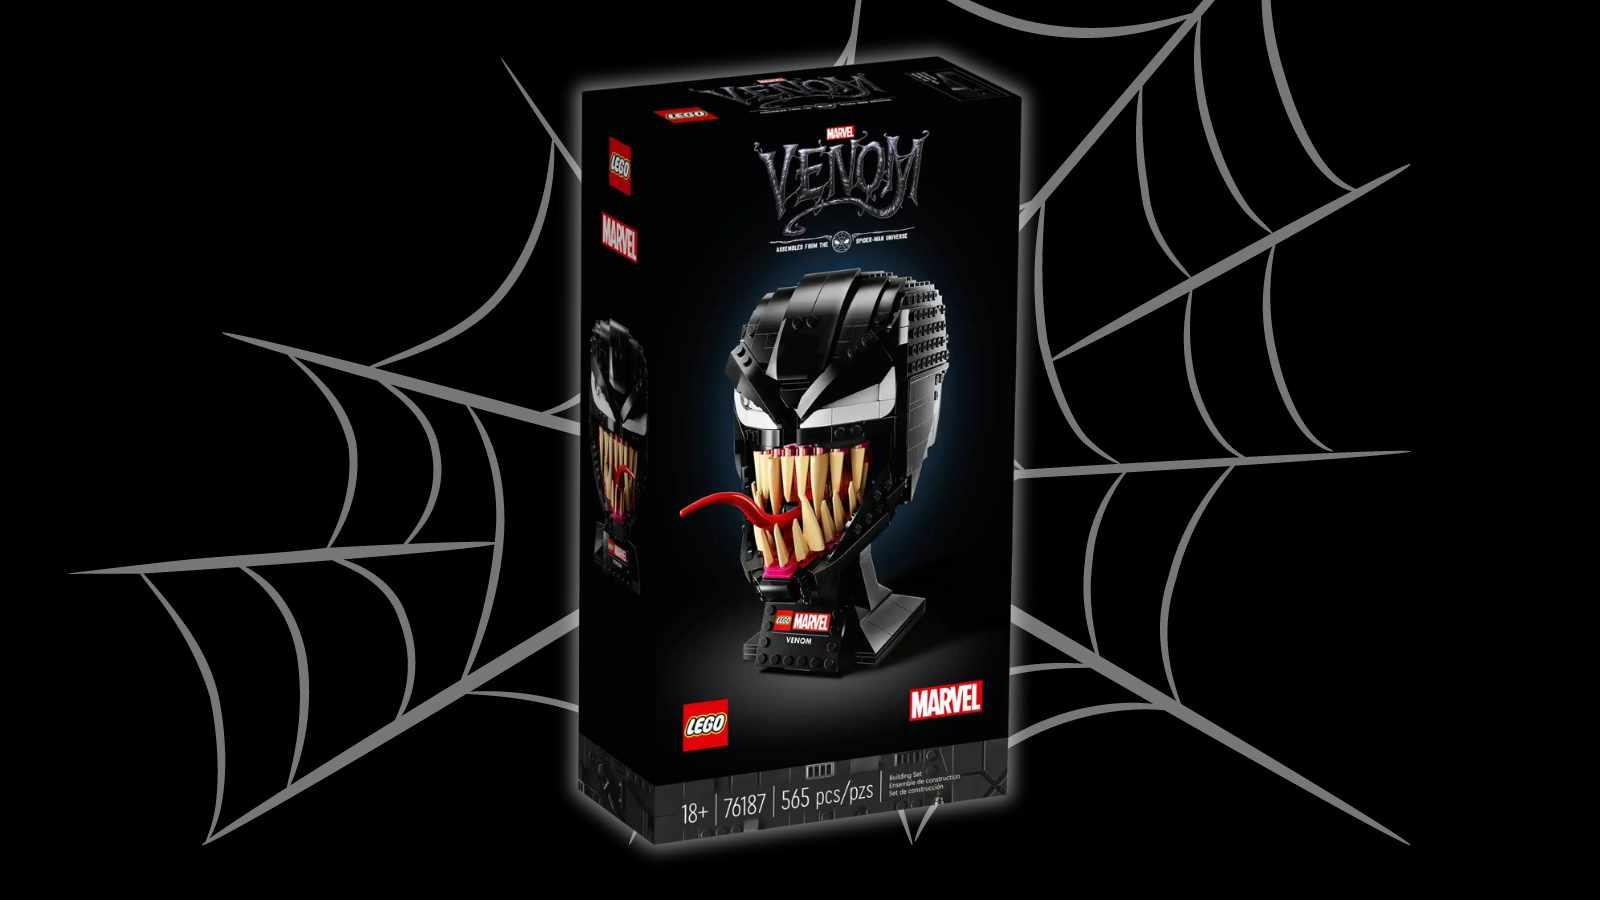 The LEGO Spider-Man Venom on a black background with a web graphic